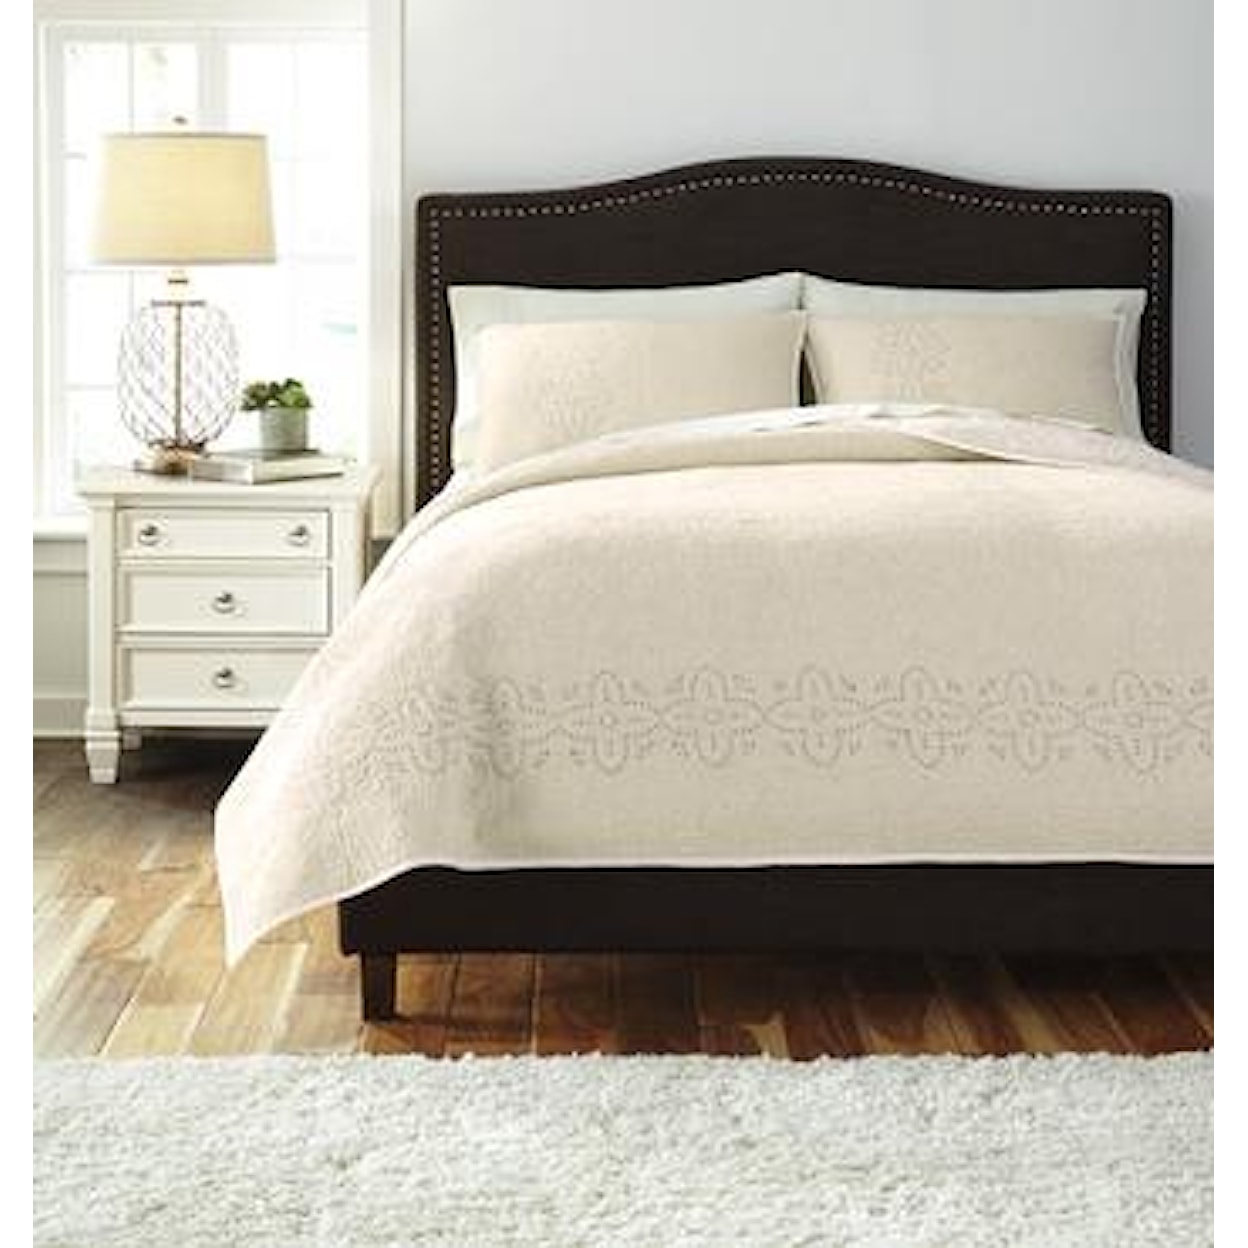 Signature Design by Ashley Bedding Sets Queen Stitched Off White Comforter Set